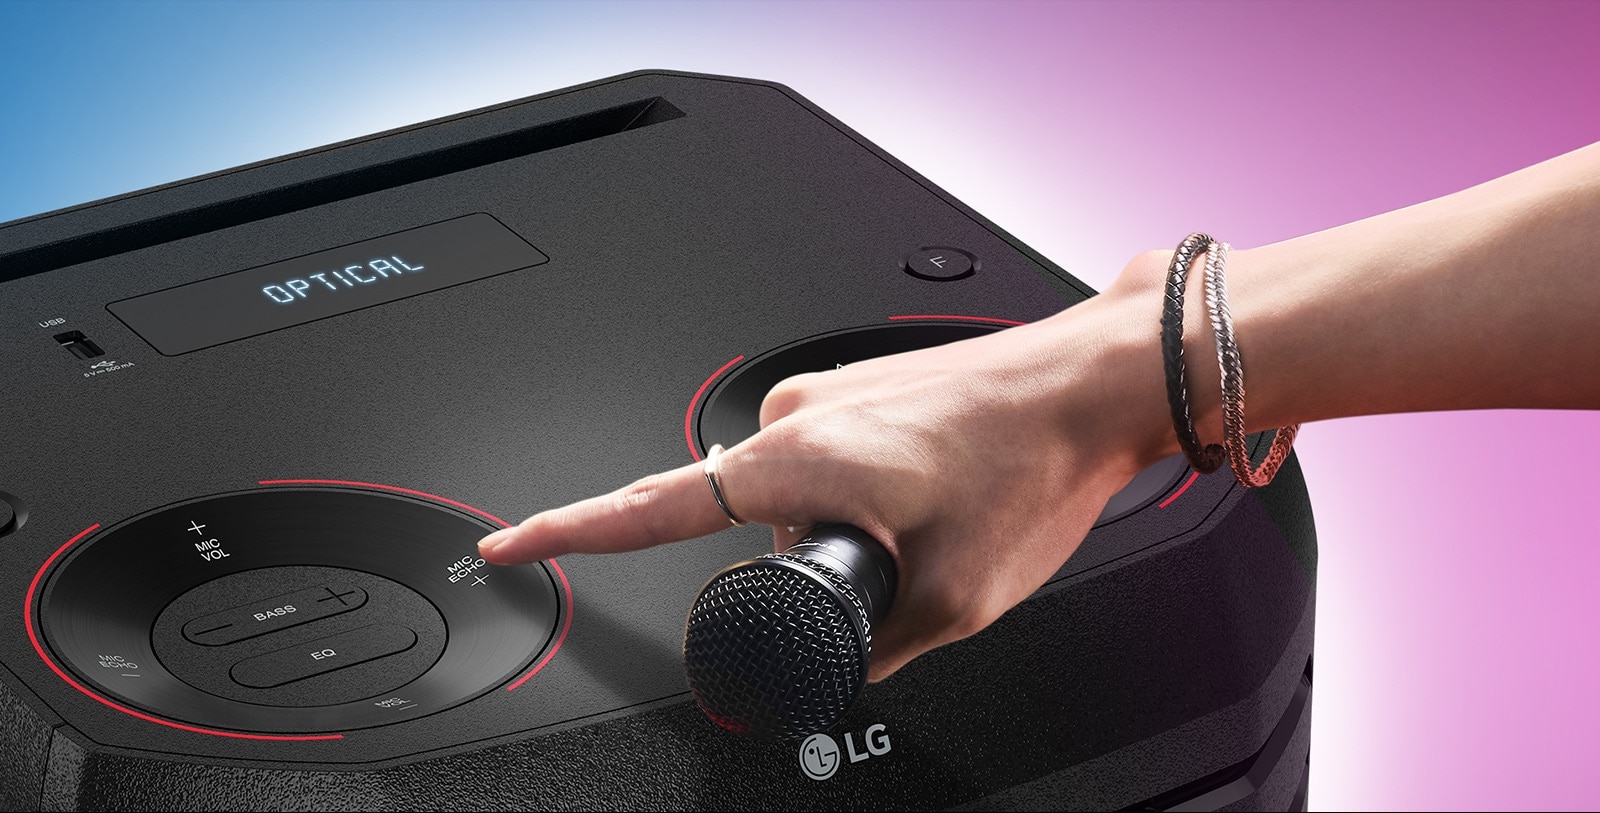 A hand holding a microphone tries to press the Mic echo button on the top of LG XBOOM.